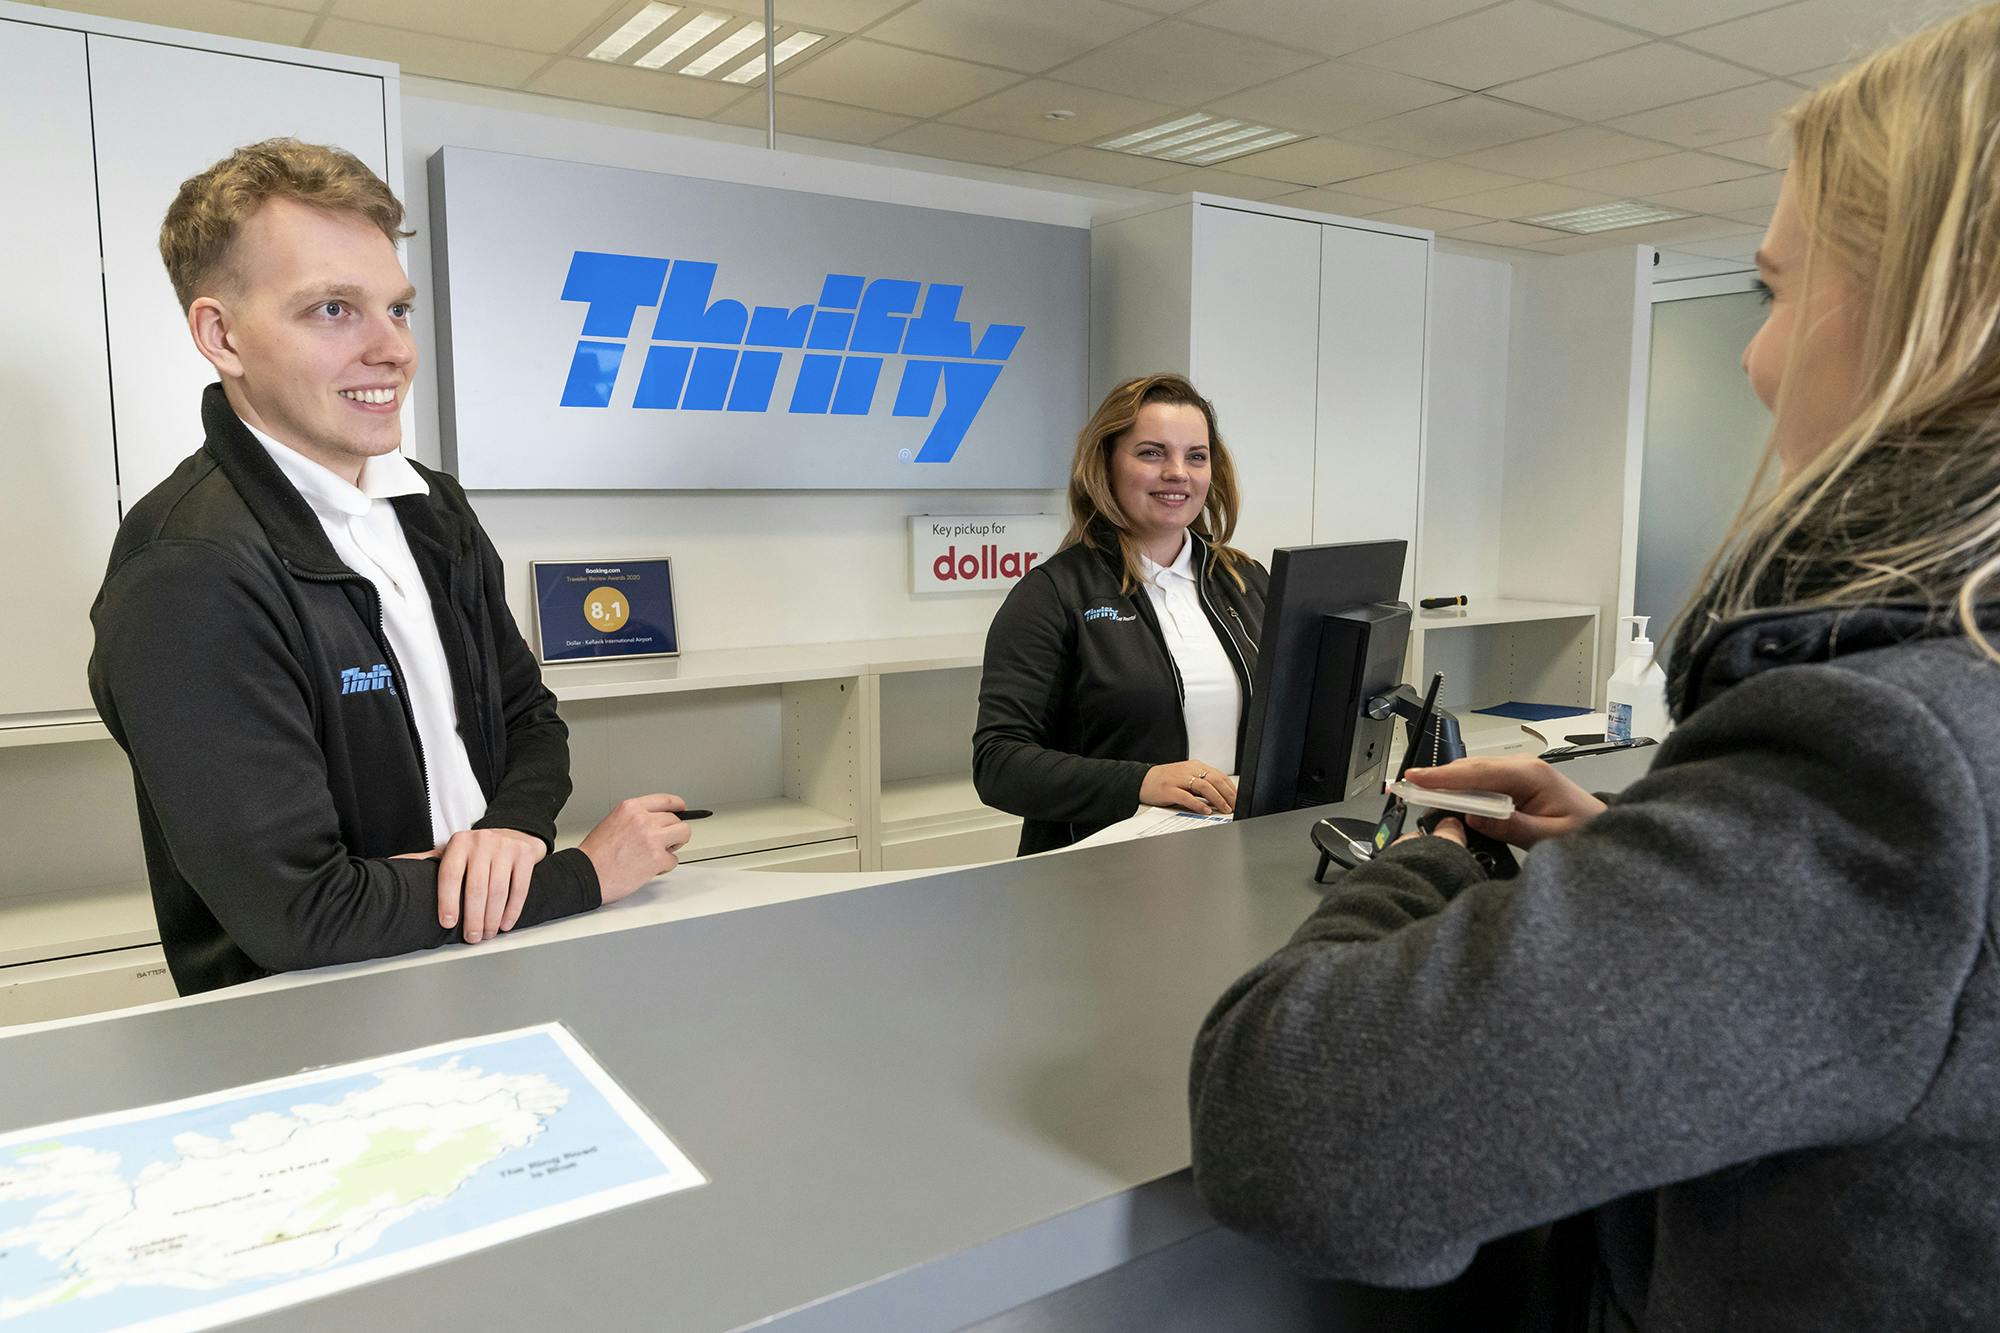 Variety of rental cars available at Thrifty's Iceland Airport location, including compact cars, family cars, 4x4s, minivans, and 9-seater minibuses